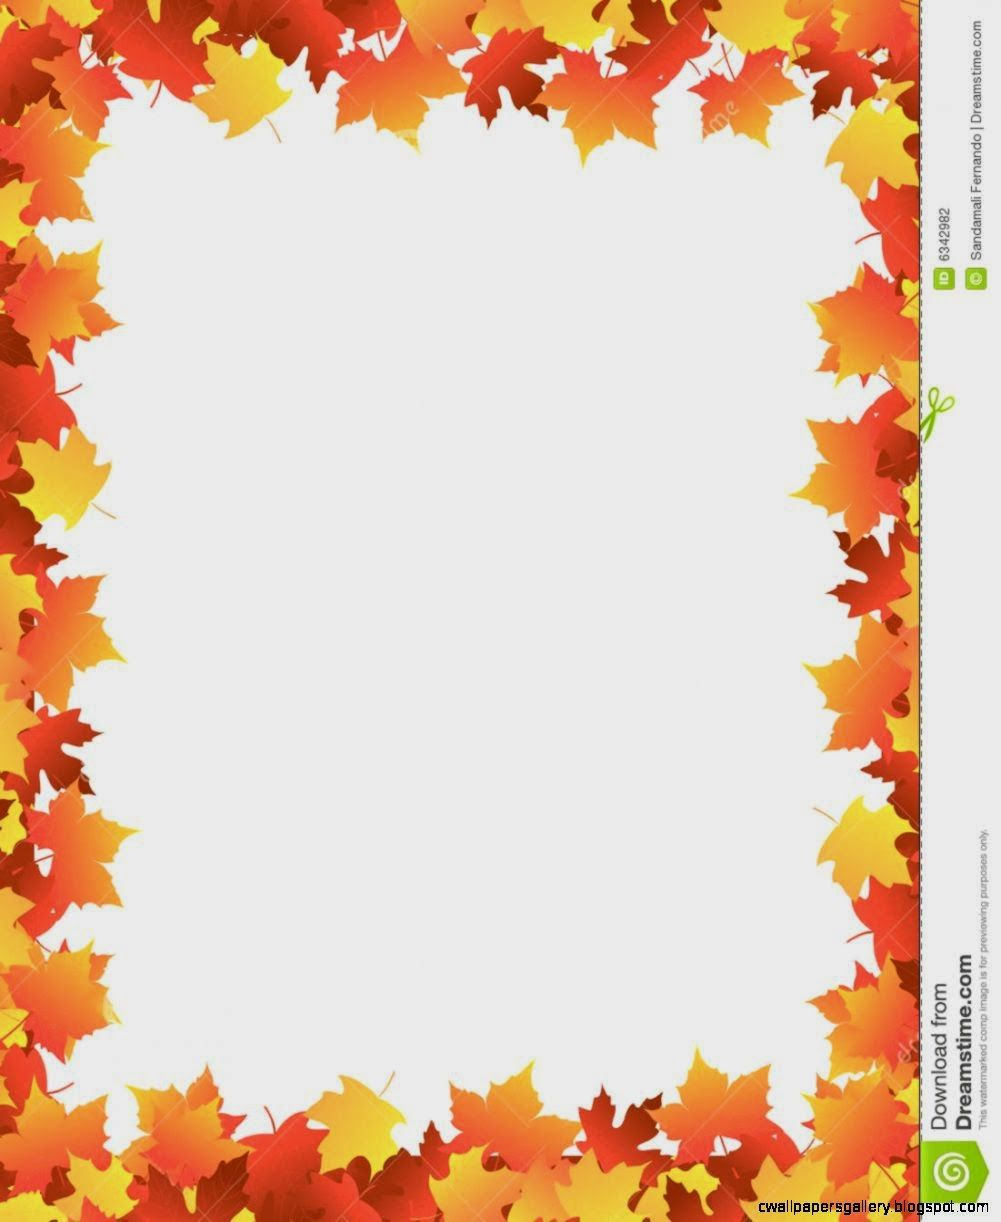 Autumn Leaves Borders Free Clip Art Images With Images Free Clip 